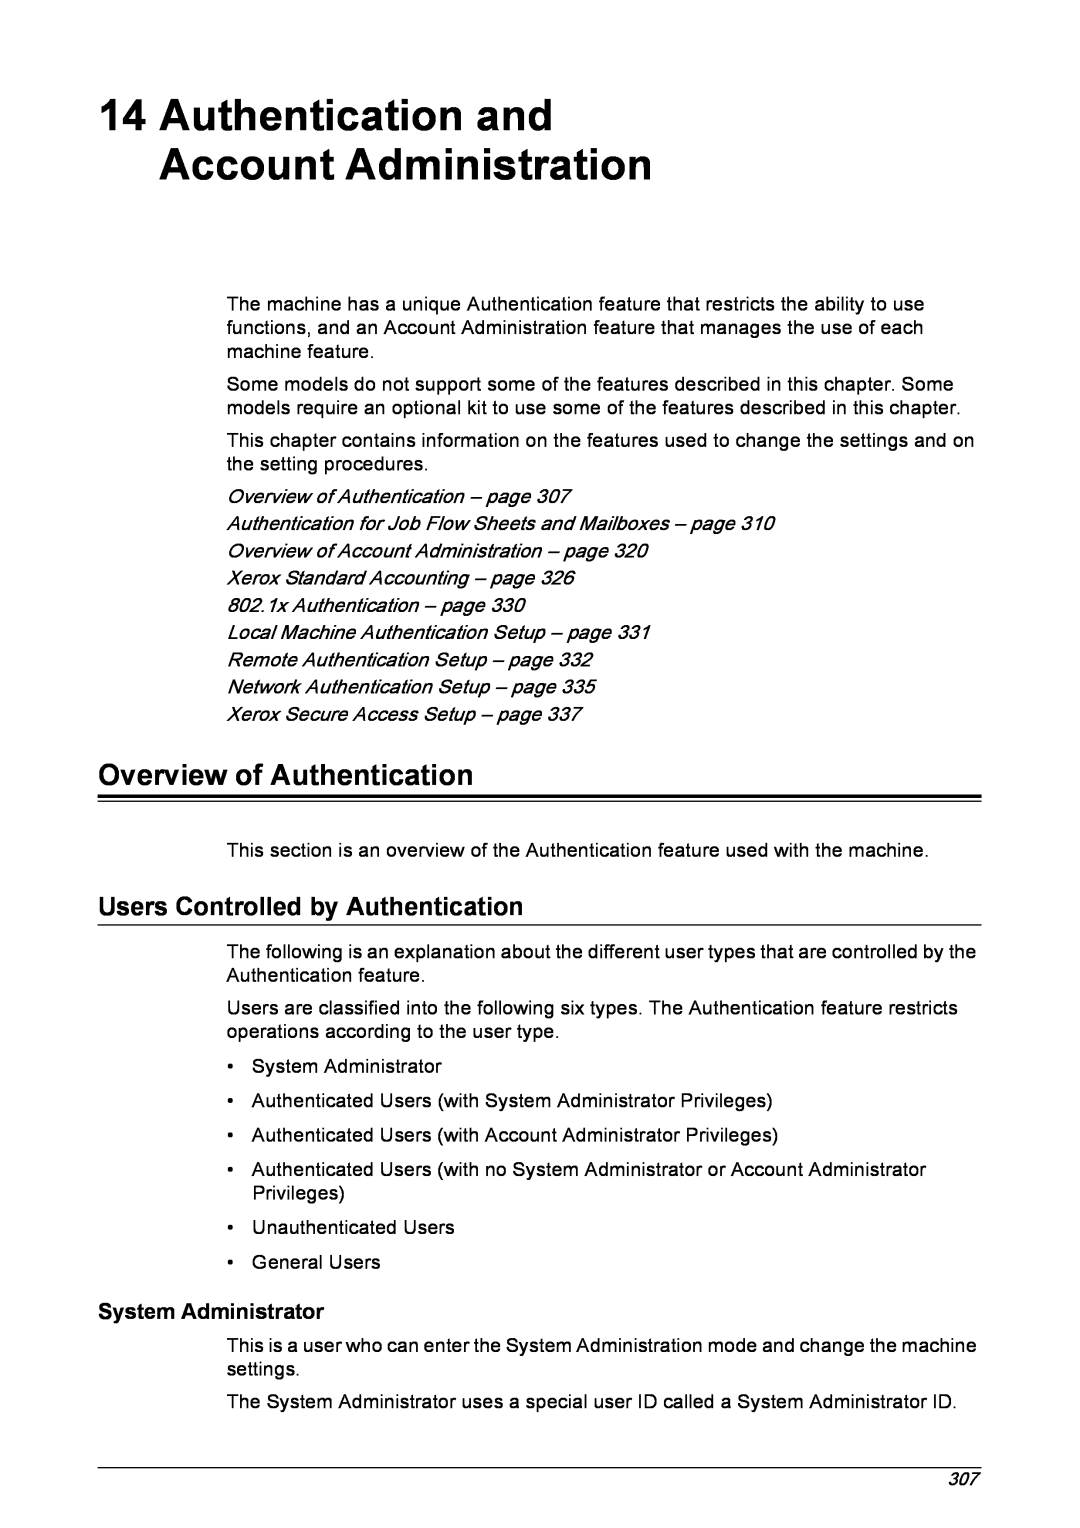 Xerox 5222 manual Authentication and Account Administration, Overview of Authentication, Users Controlled by Authentication 